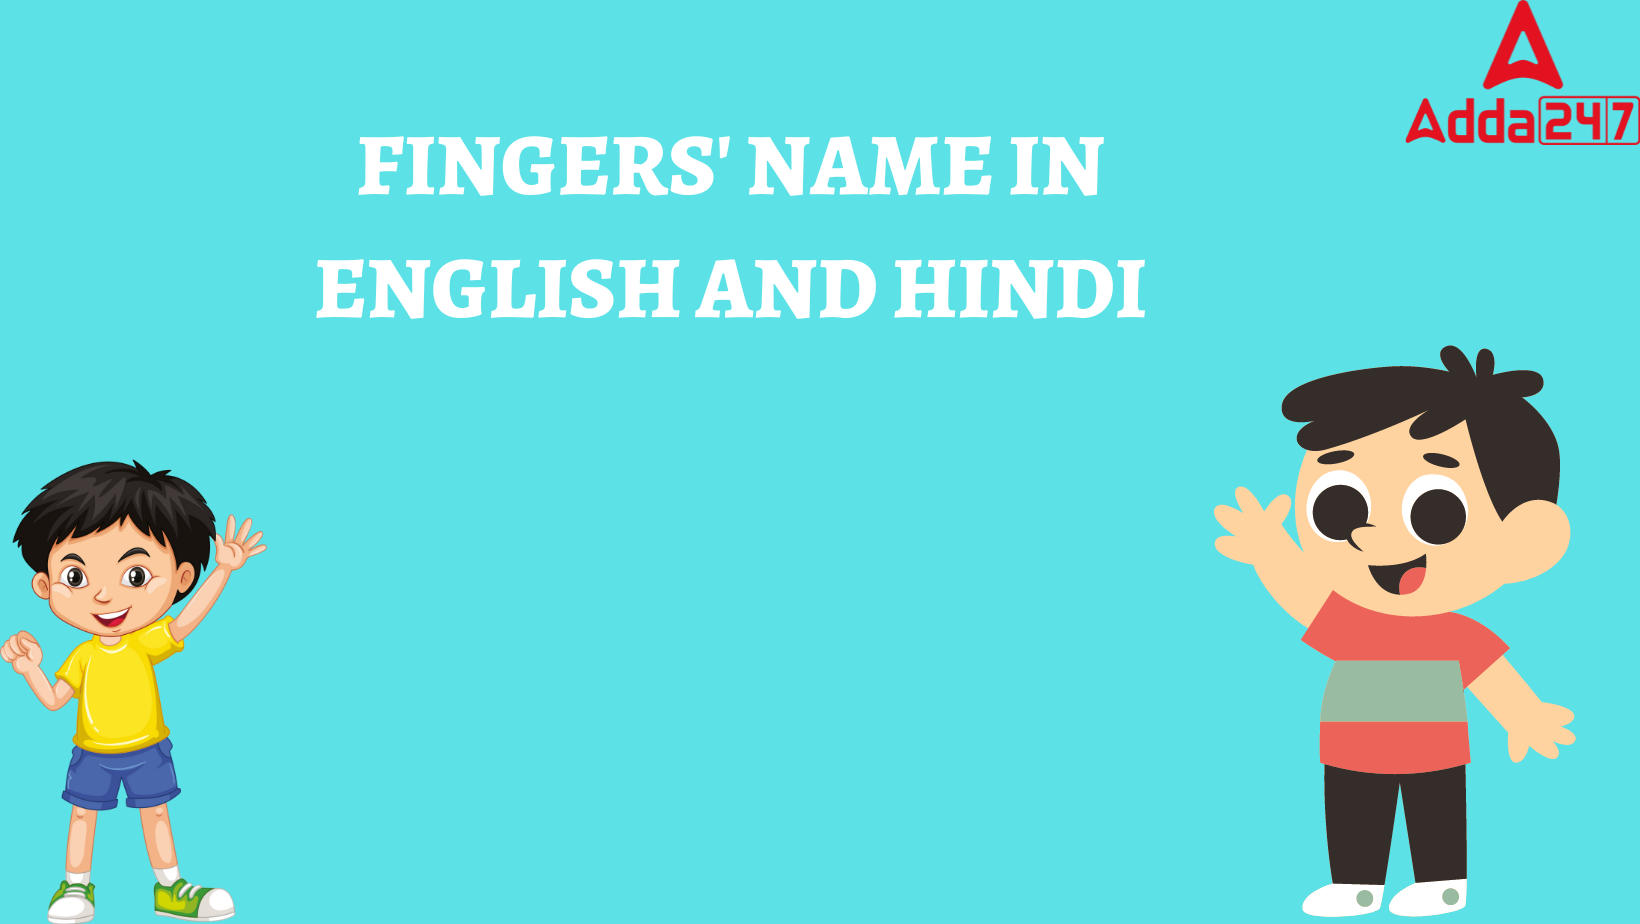 Fingers Names in English- Check Hand Five fingers Name